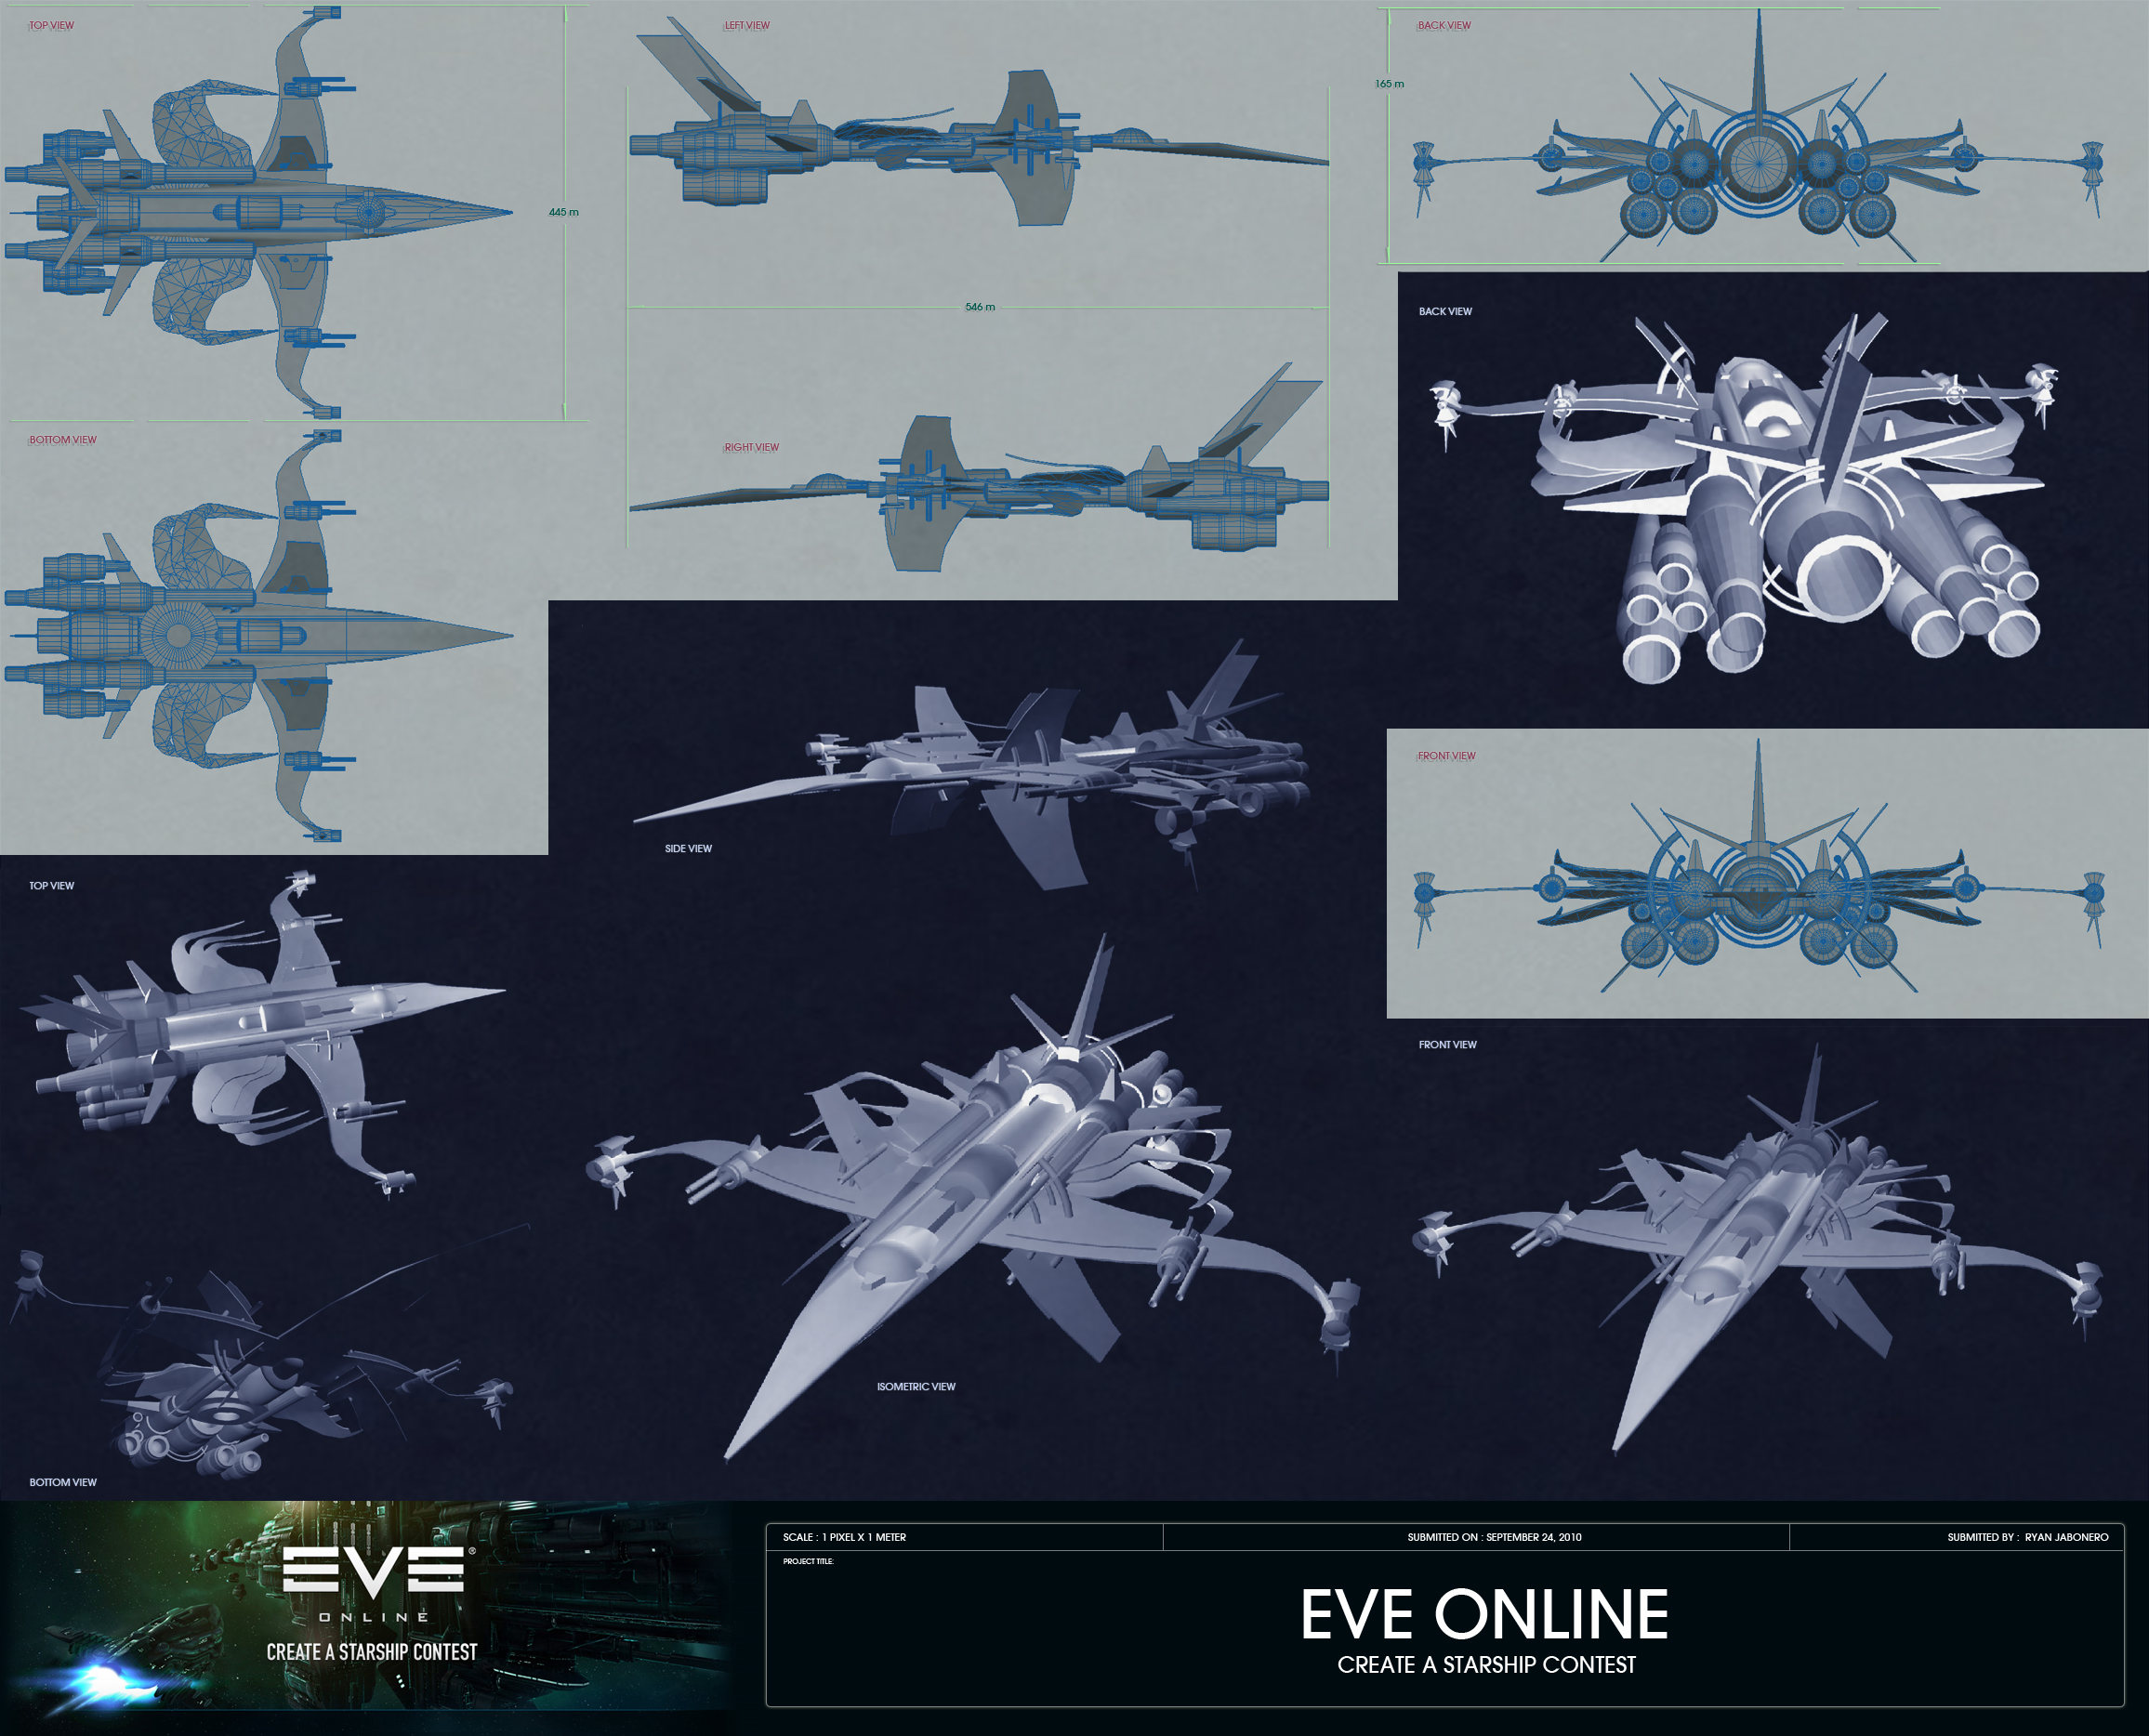 eve online where to buy shares